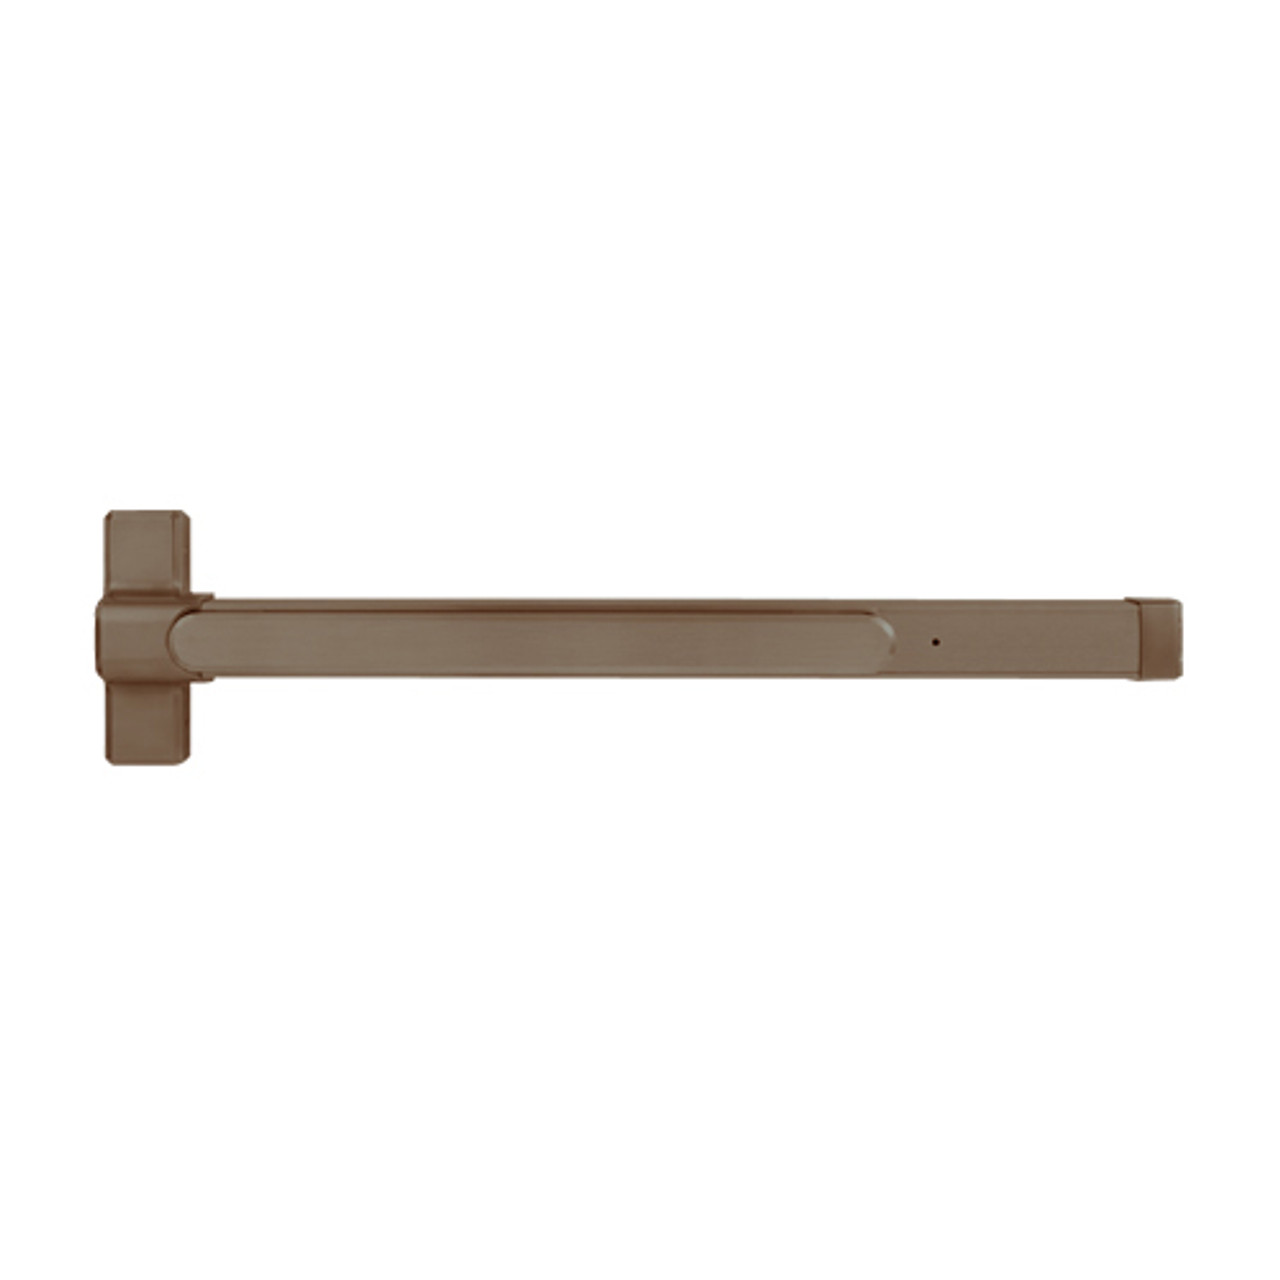 QED127LR-36-7-313AN Stanley QED100 Series Heavy Duty Concealed Vertical Rod Hex Dog Exit Device in Anodized Duranodic Bronze Finish